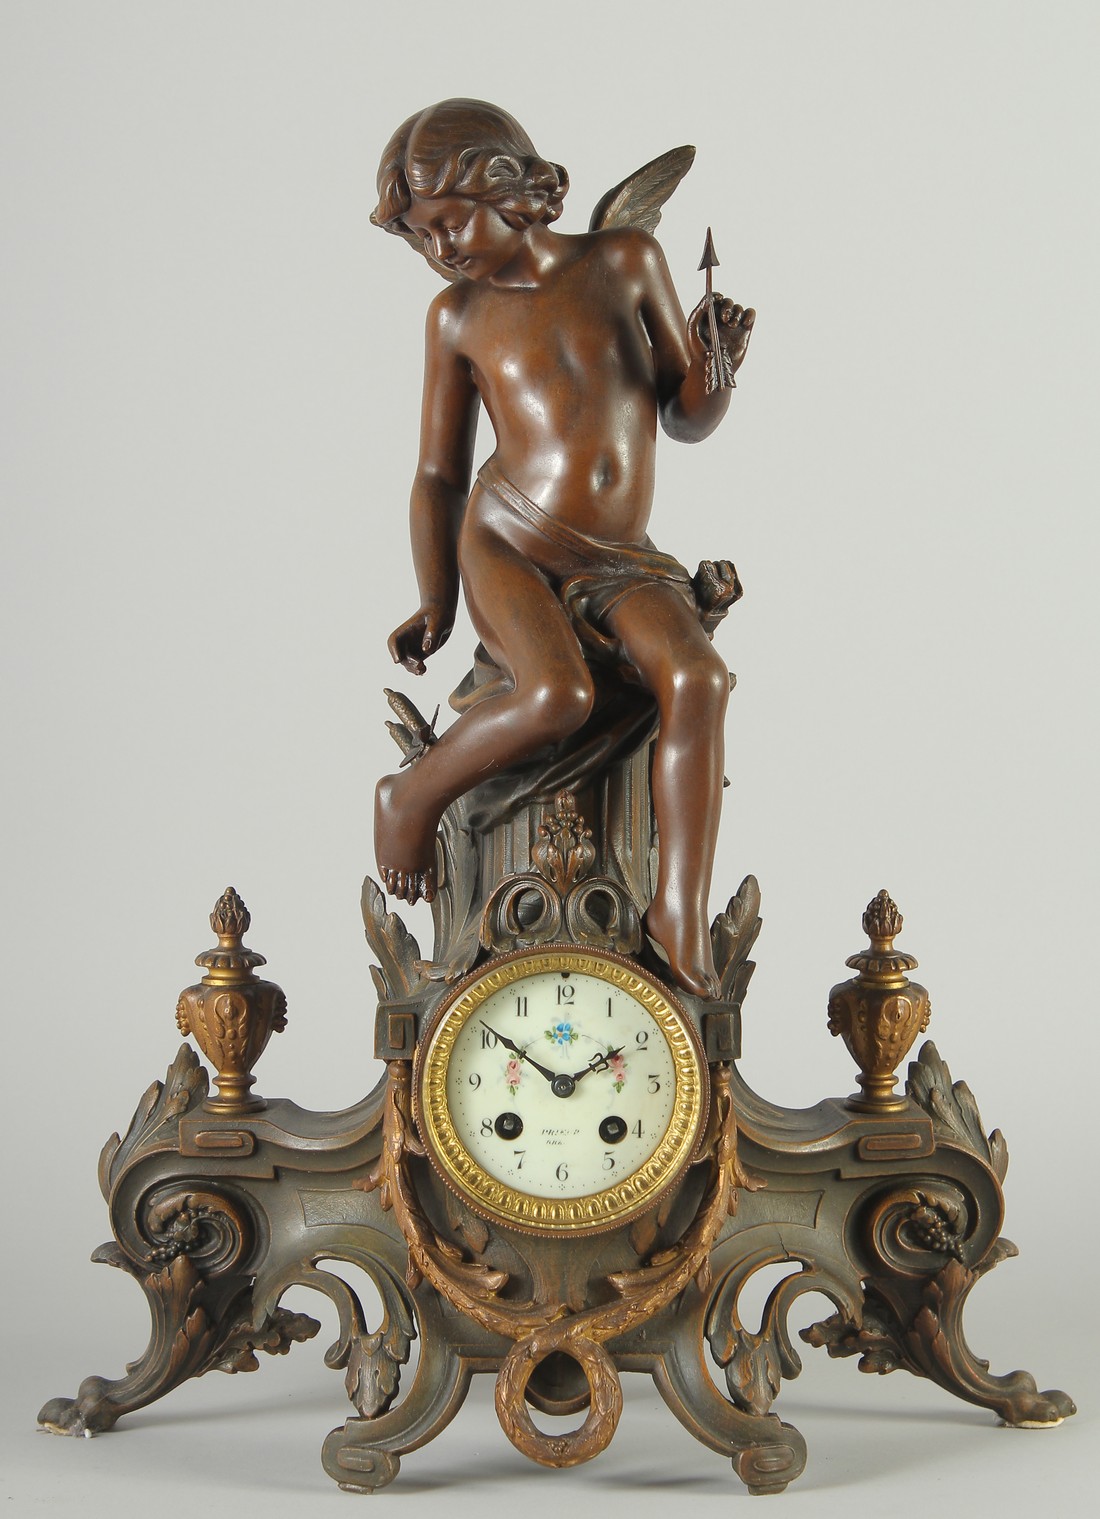 A 19TH CENTURY FRENCH SPELTER FIGURAL MANTLE CLOCK with eight day movement, floral painted porcelain